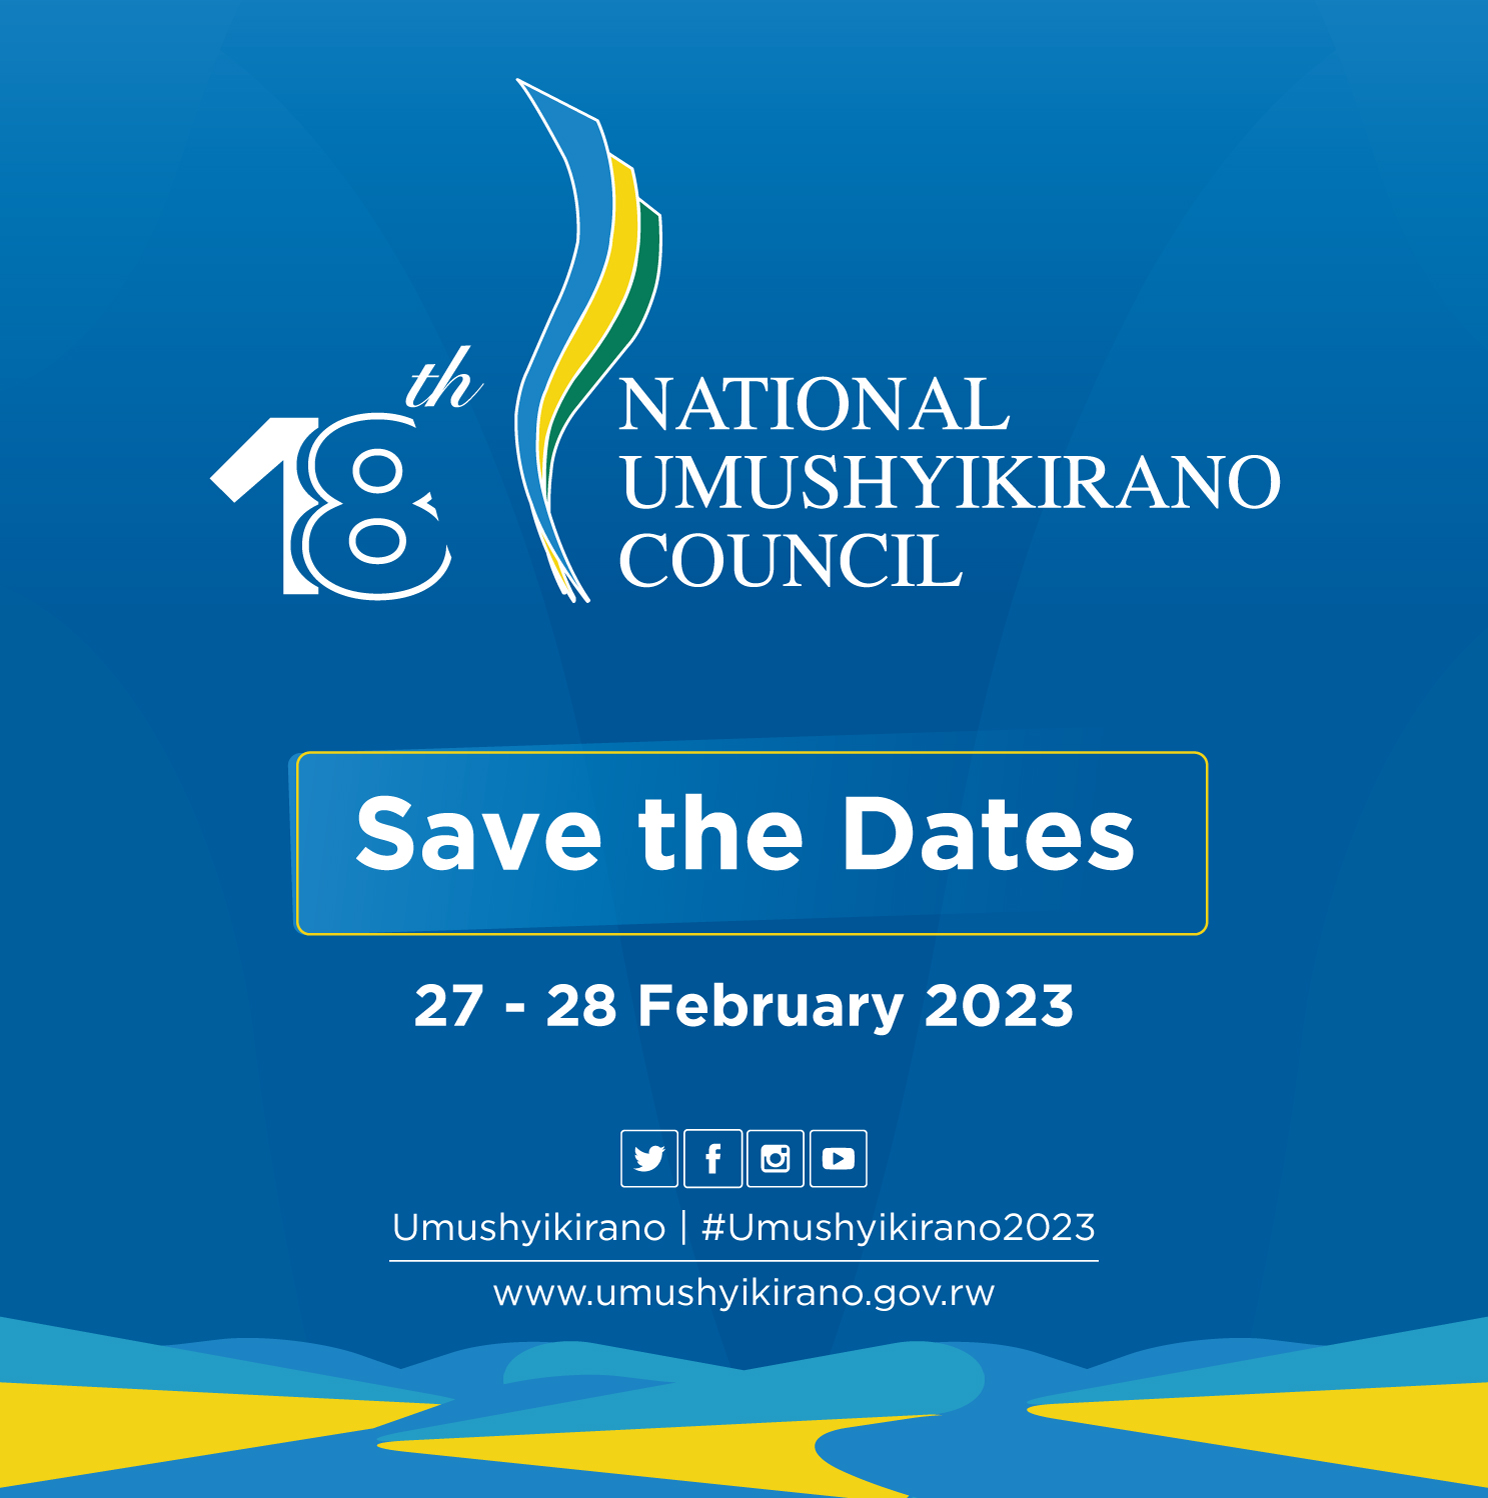 Government of Rwanda on Twitter: "In less than a week, the National  Umushyikirano Council will be held at Kigali Convention Centre. For more  information related to #Umushyikirano2023, follow @umushyikirano social  media platforms.